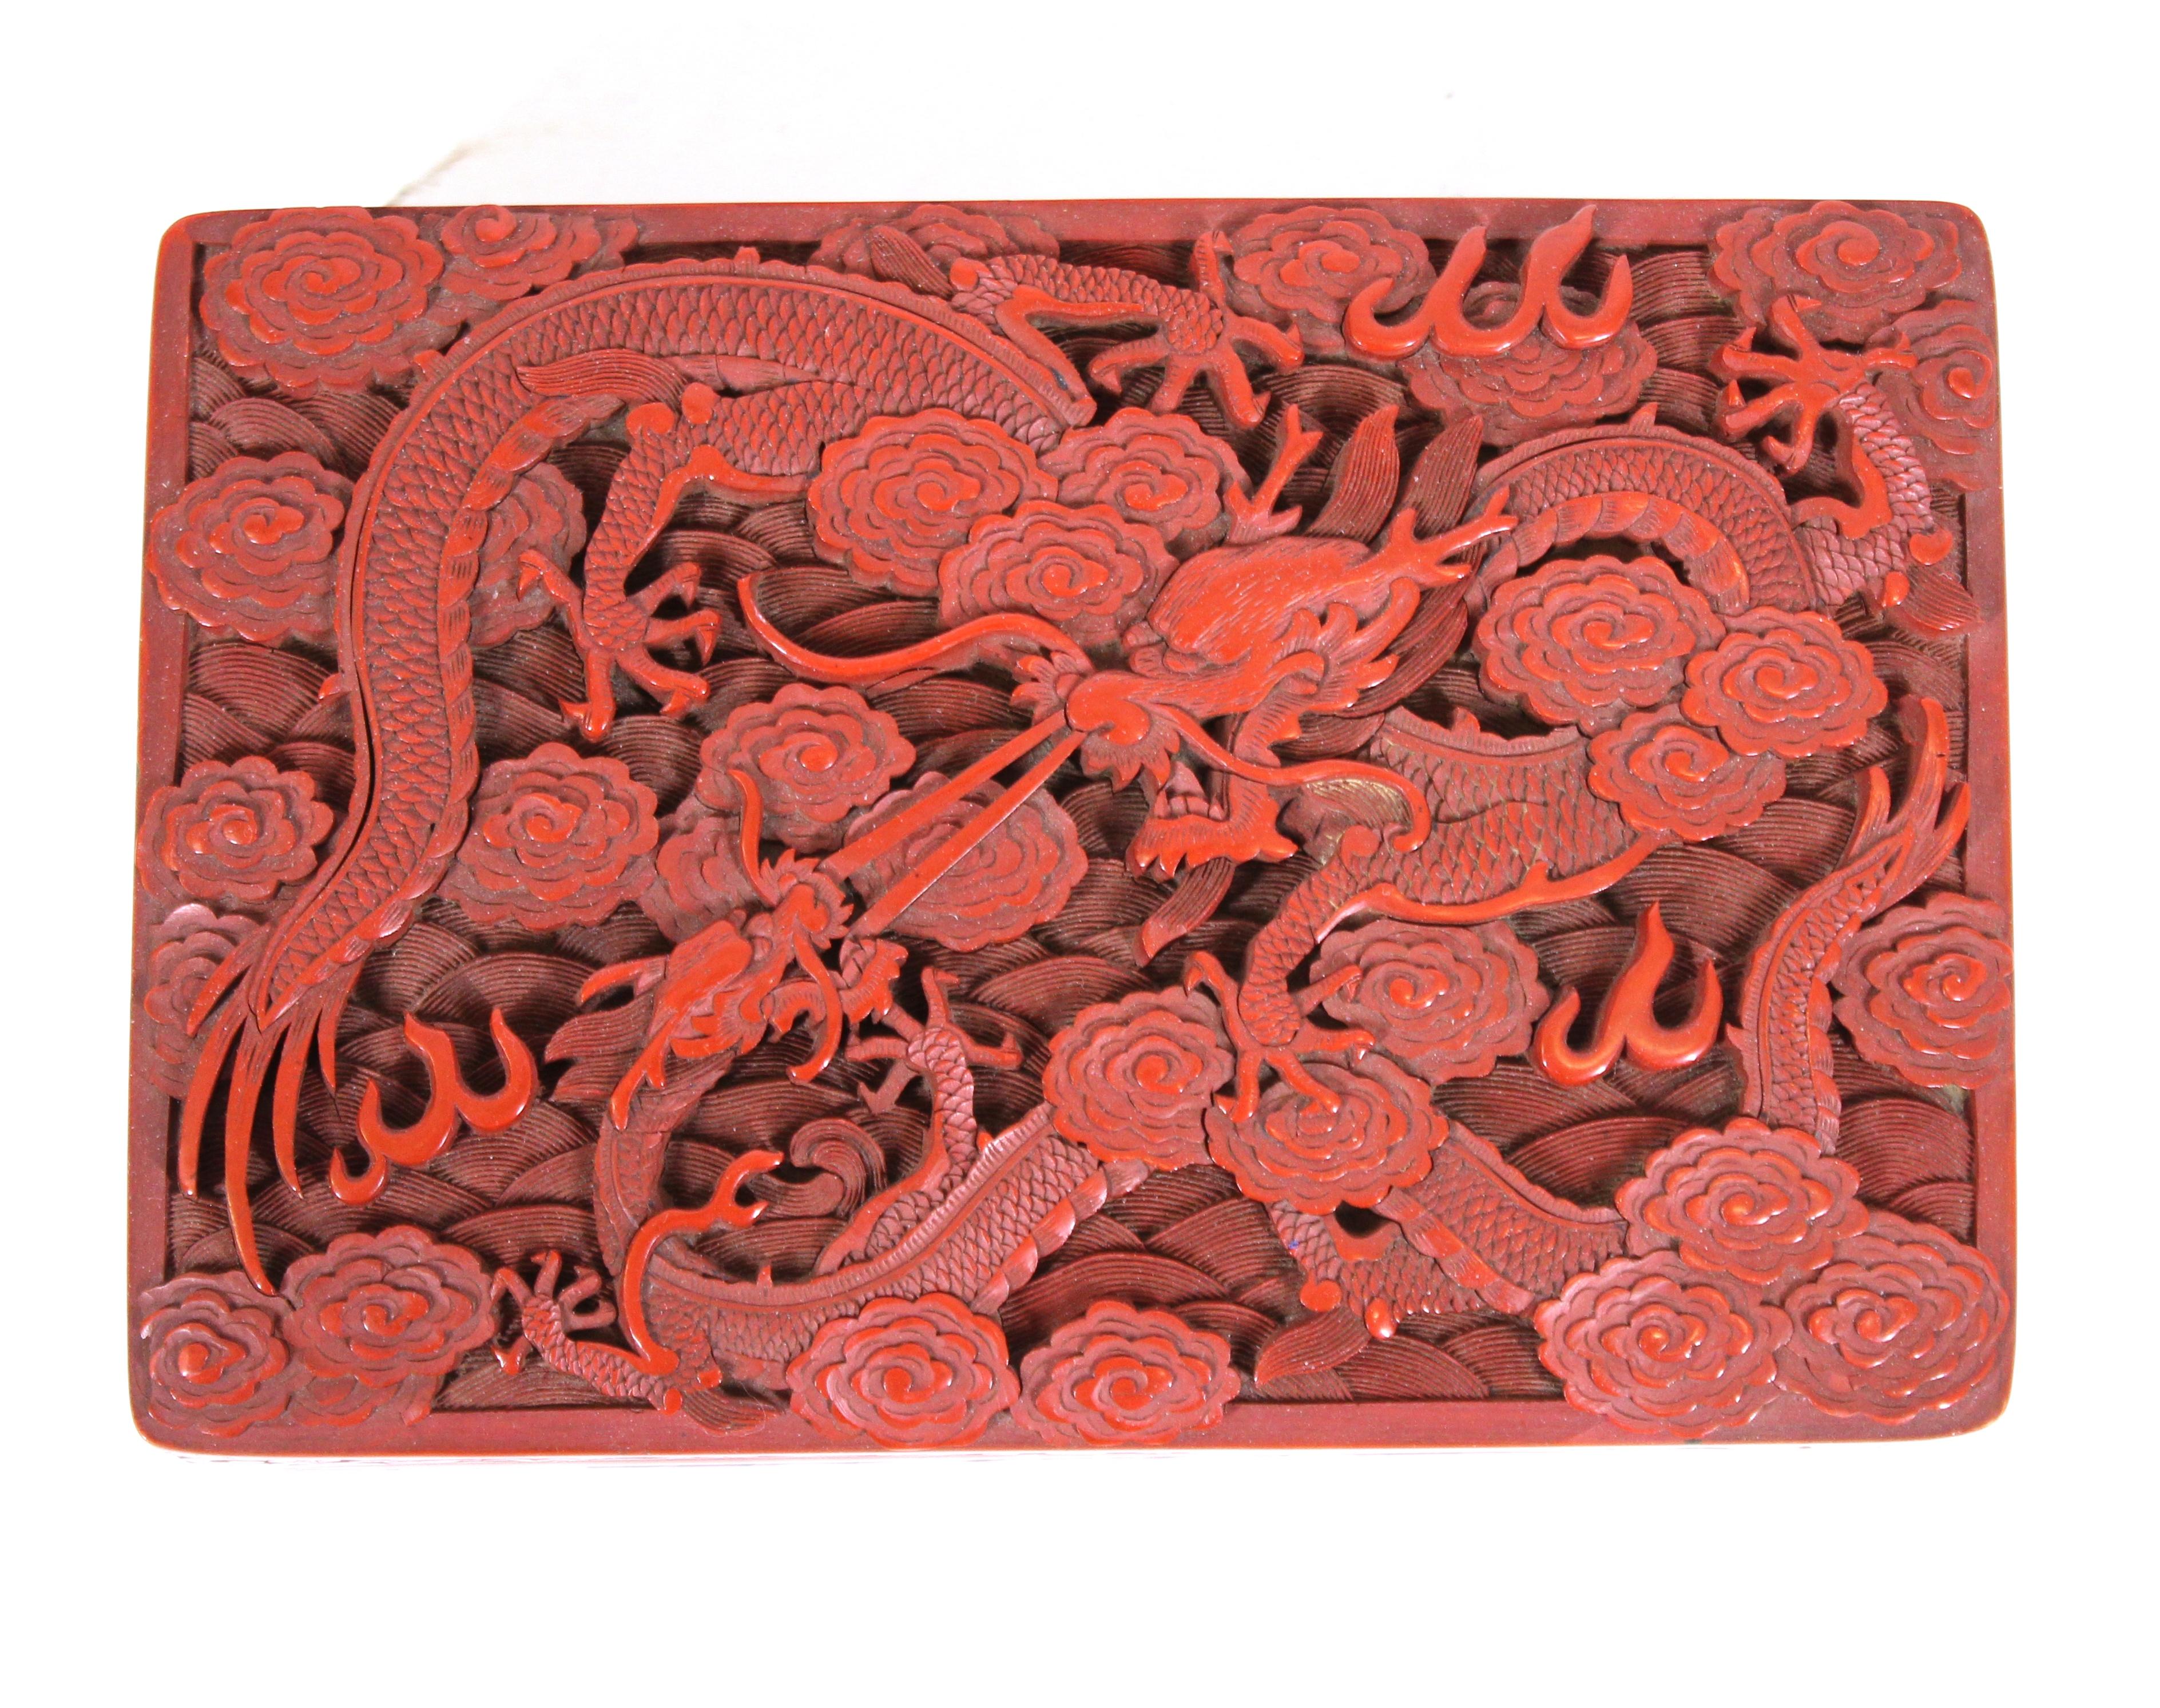 Early 20th Century Chinese Red Cinnabar Box with Dragon Motif